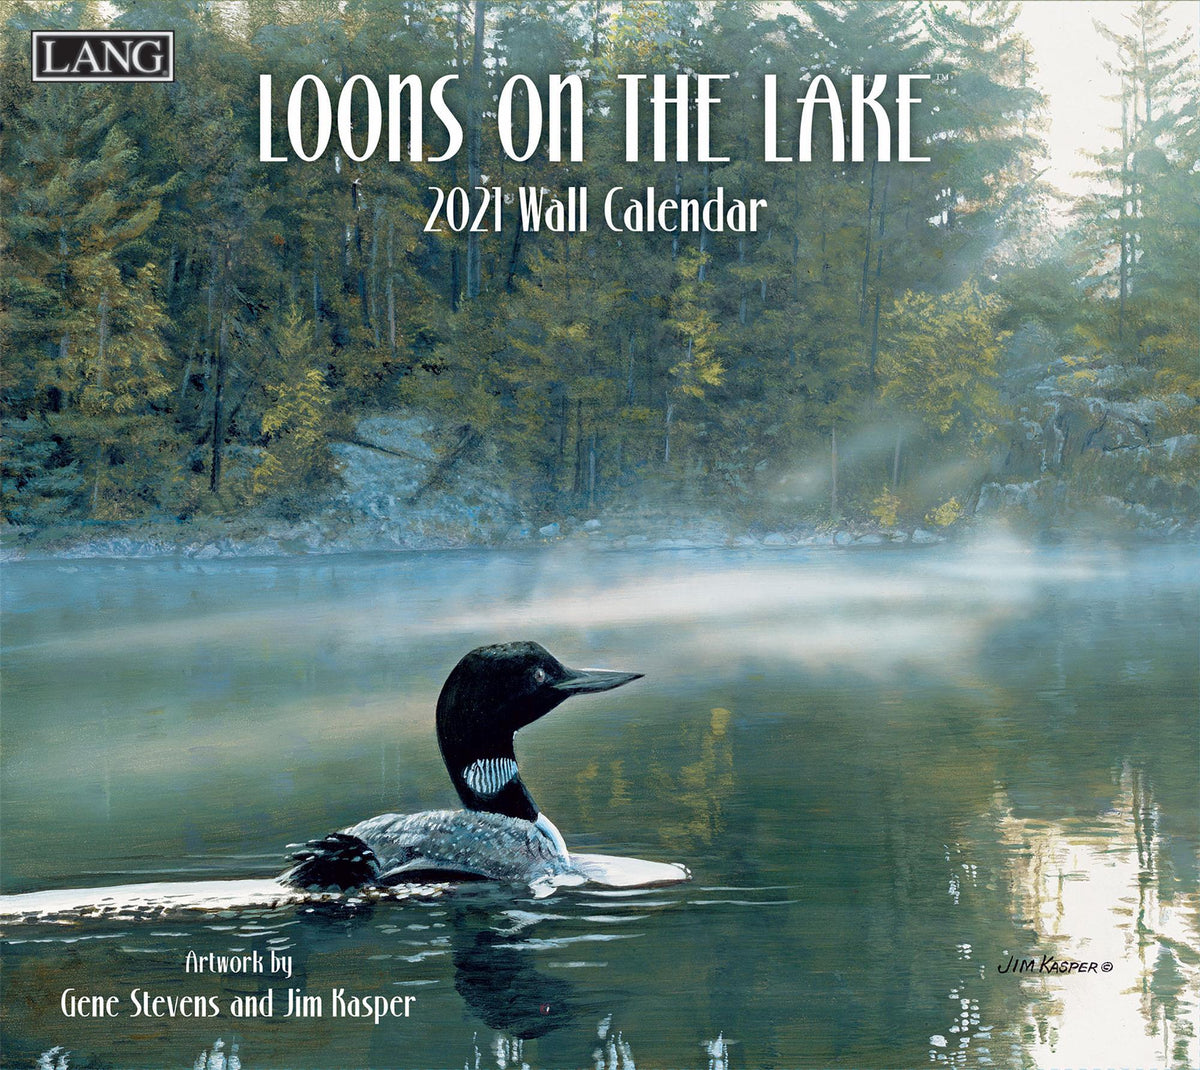 Loons on the Lake Calendar - Wild Wings